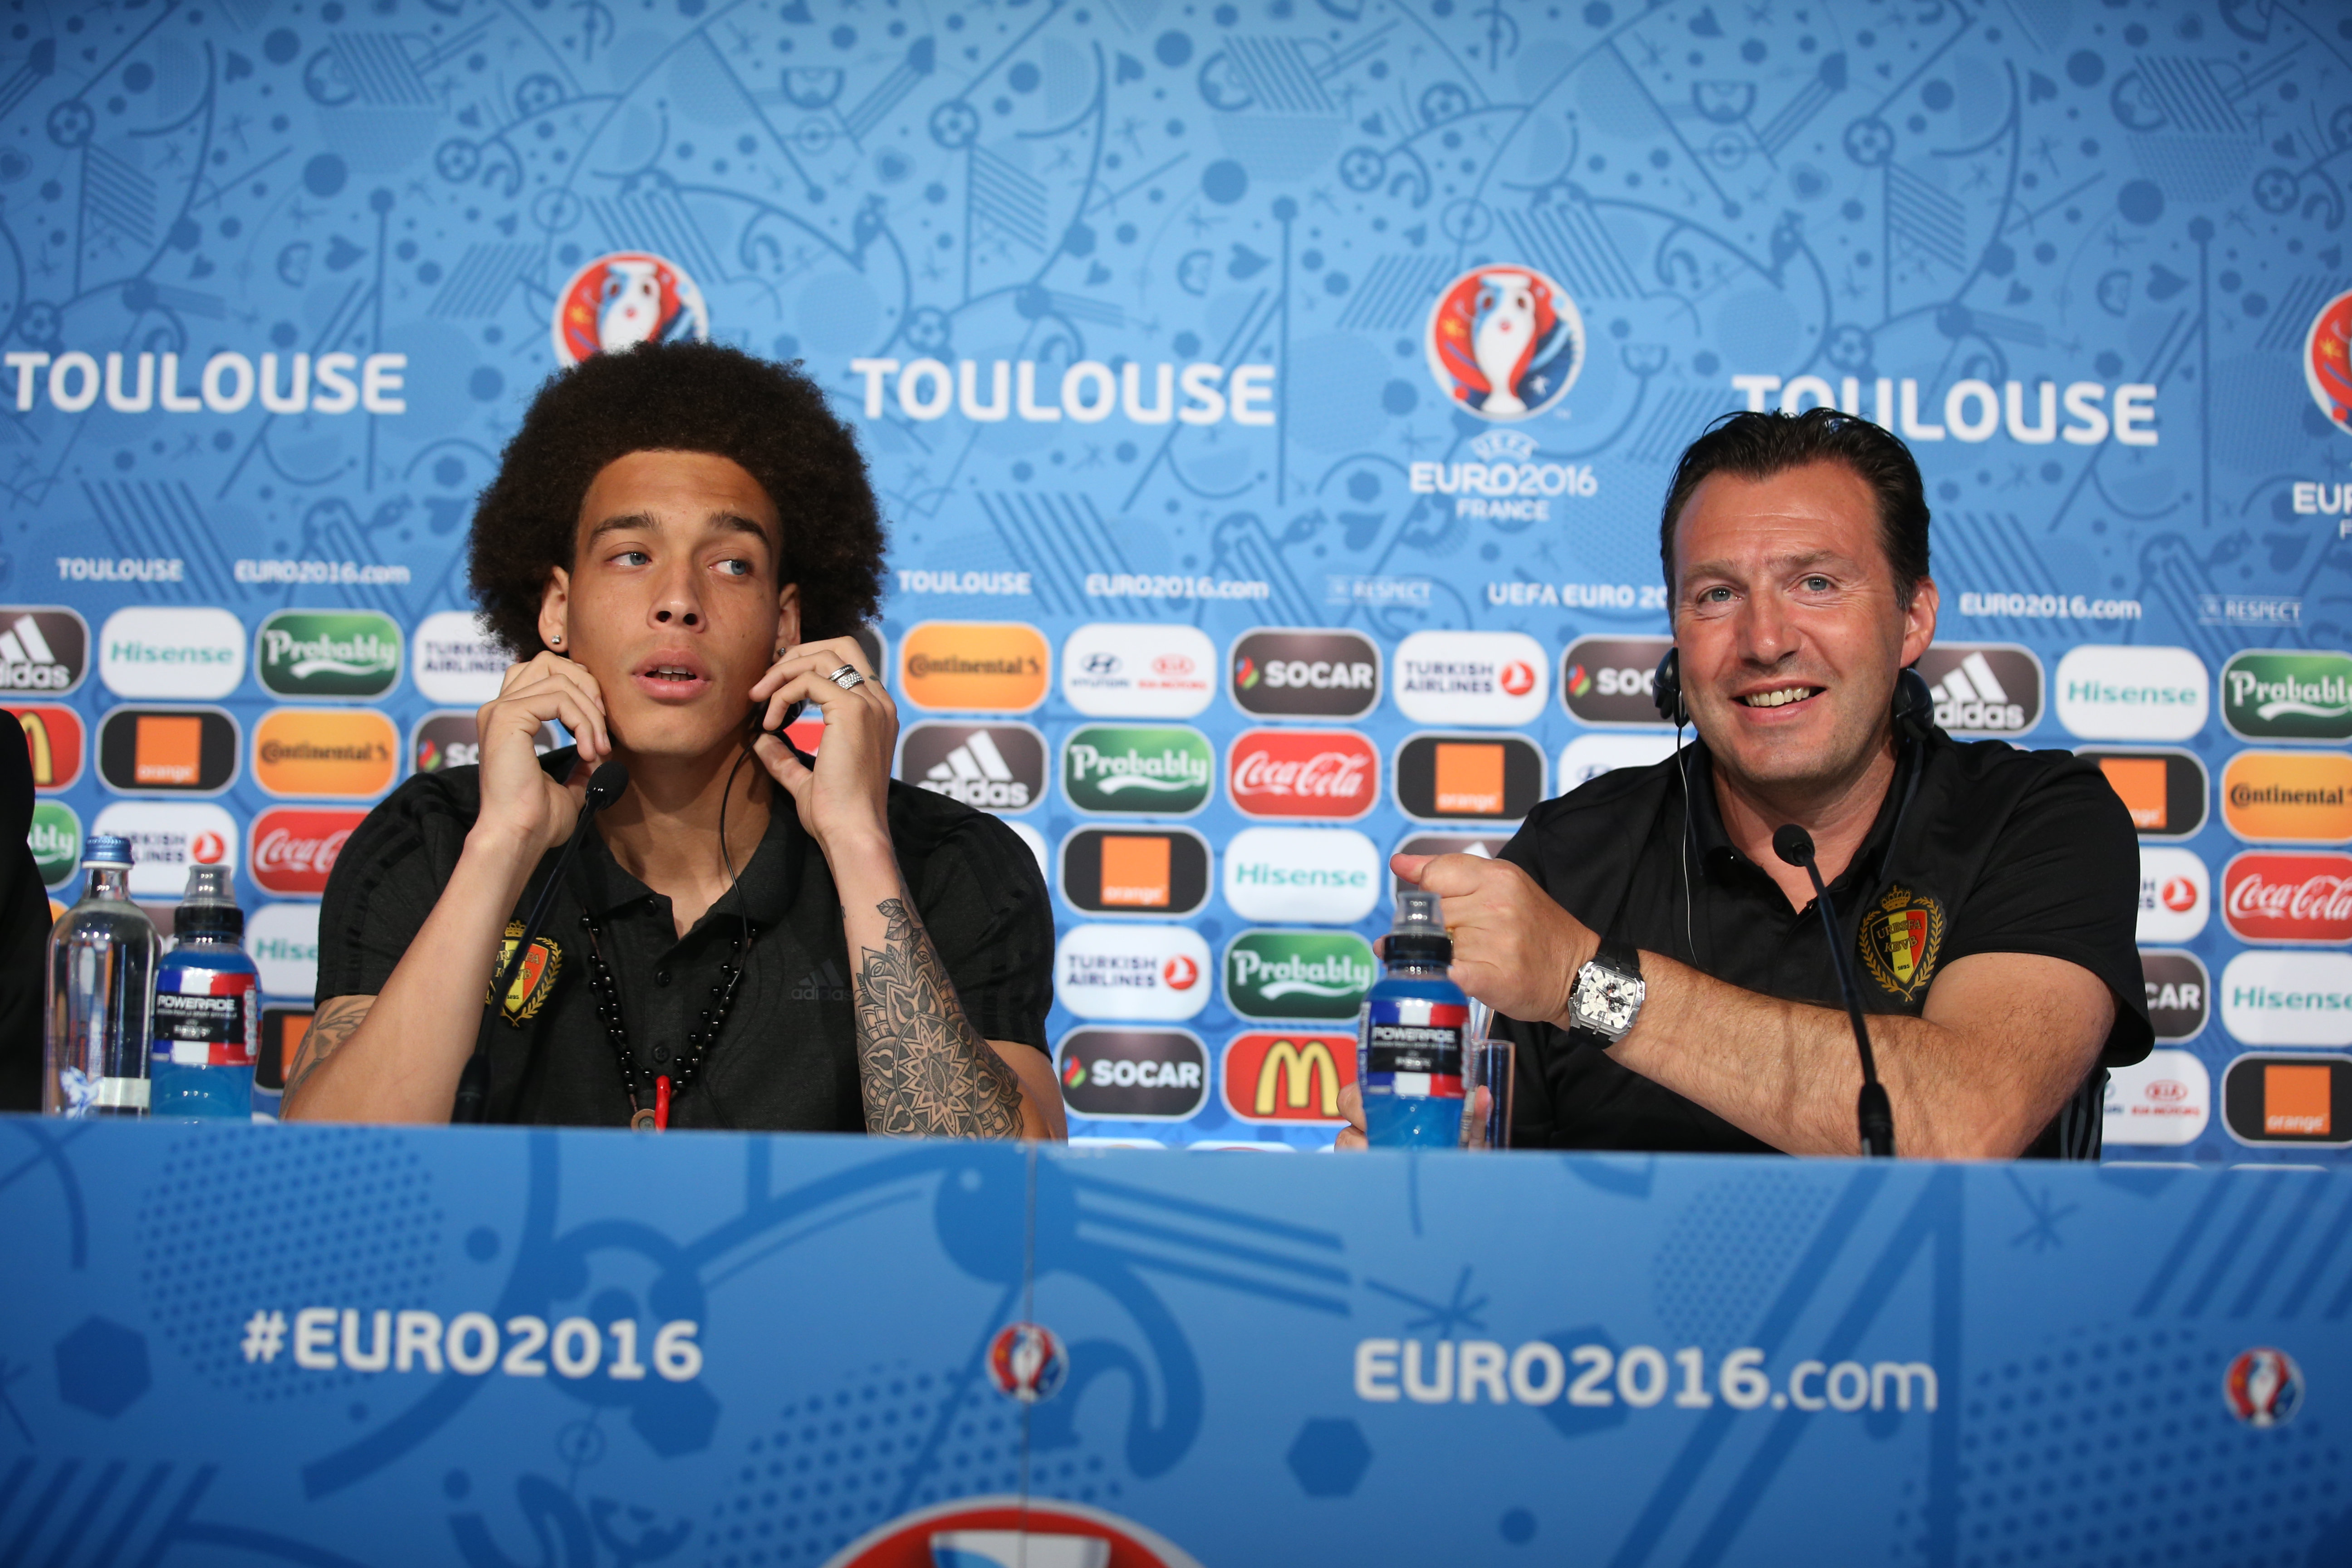 TOULOUSE, FRANCE - JUNE 25:  In this handout image provided by UEFA, Player Axel Witsel and Head coach Marc Wilmots of Belgium attend the press conference at Stadium Municipal on June 25, 2016 in Toulouse, France. (Photo by Handout/Getty Images)